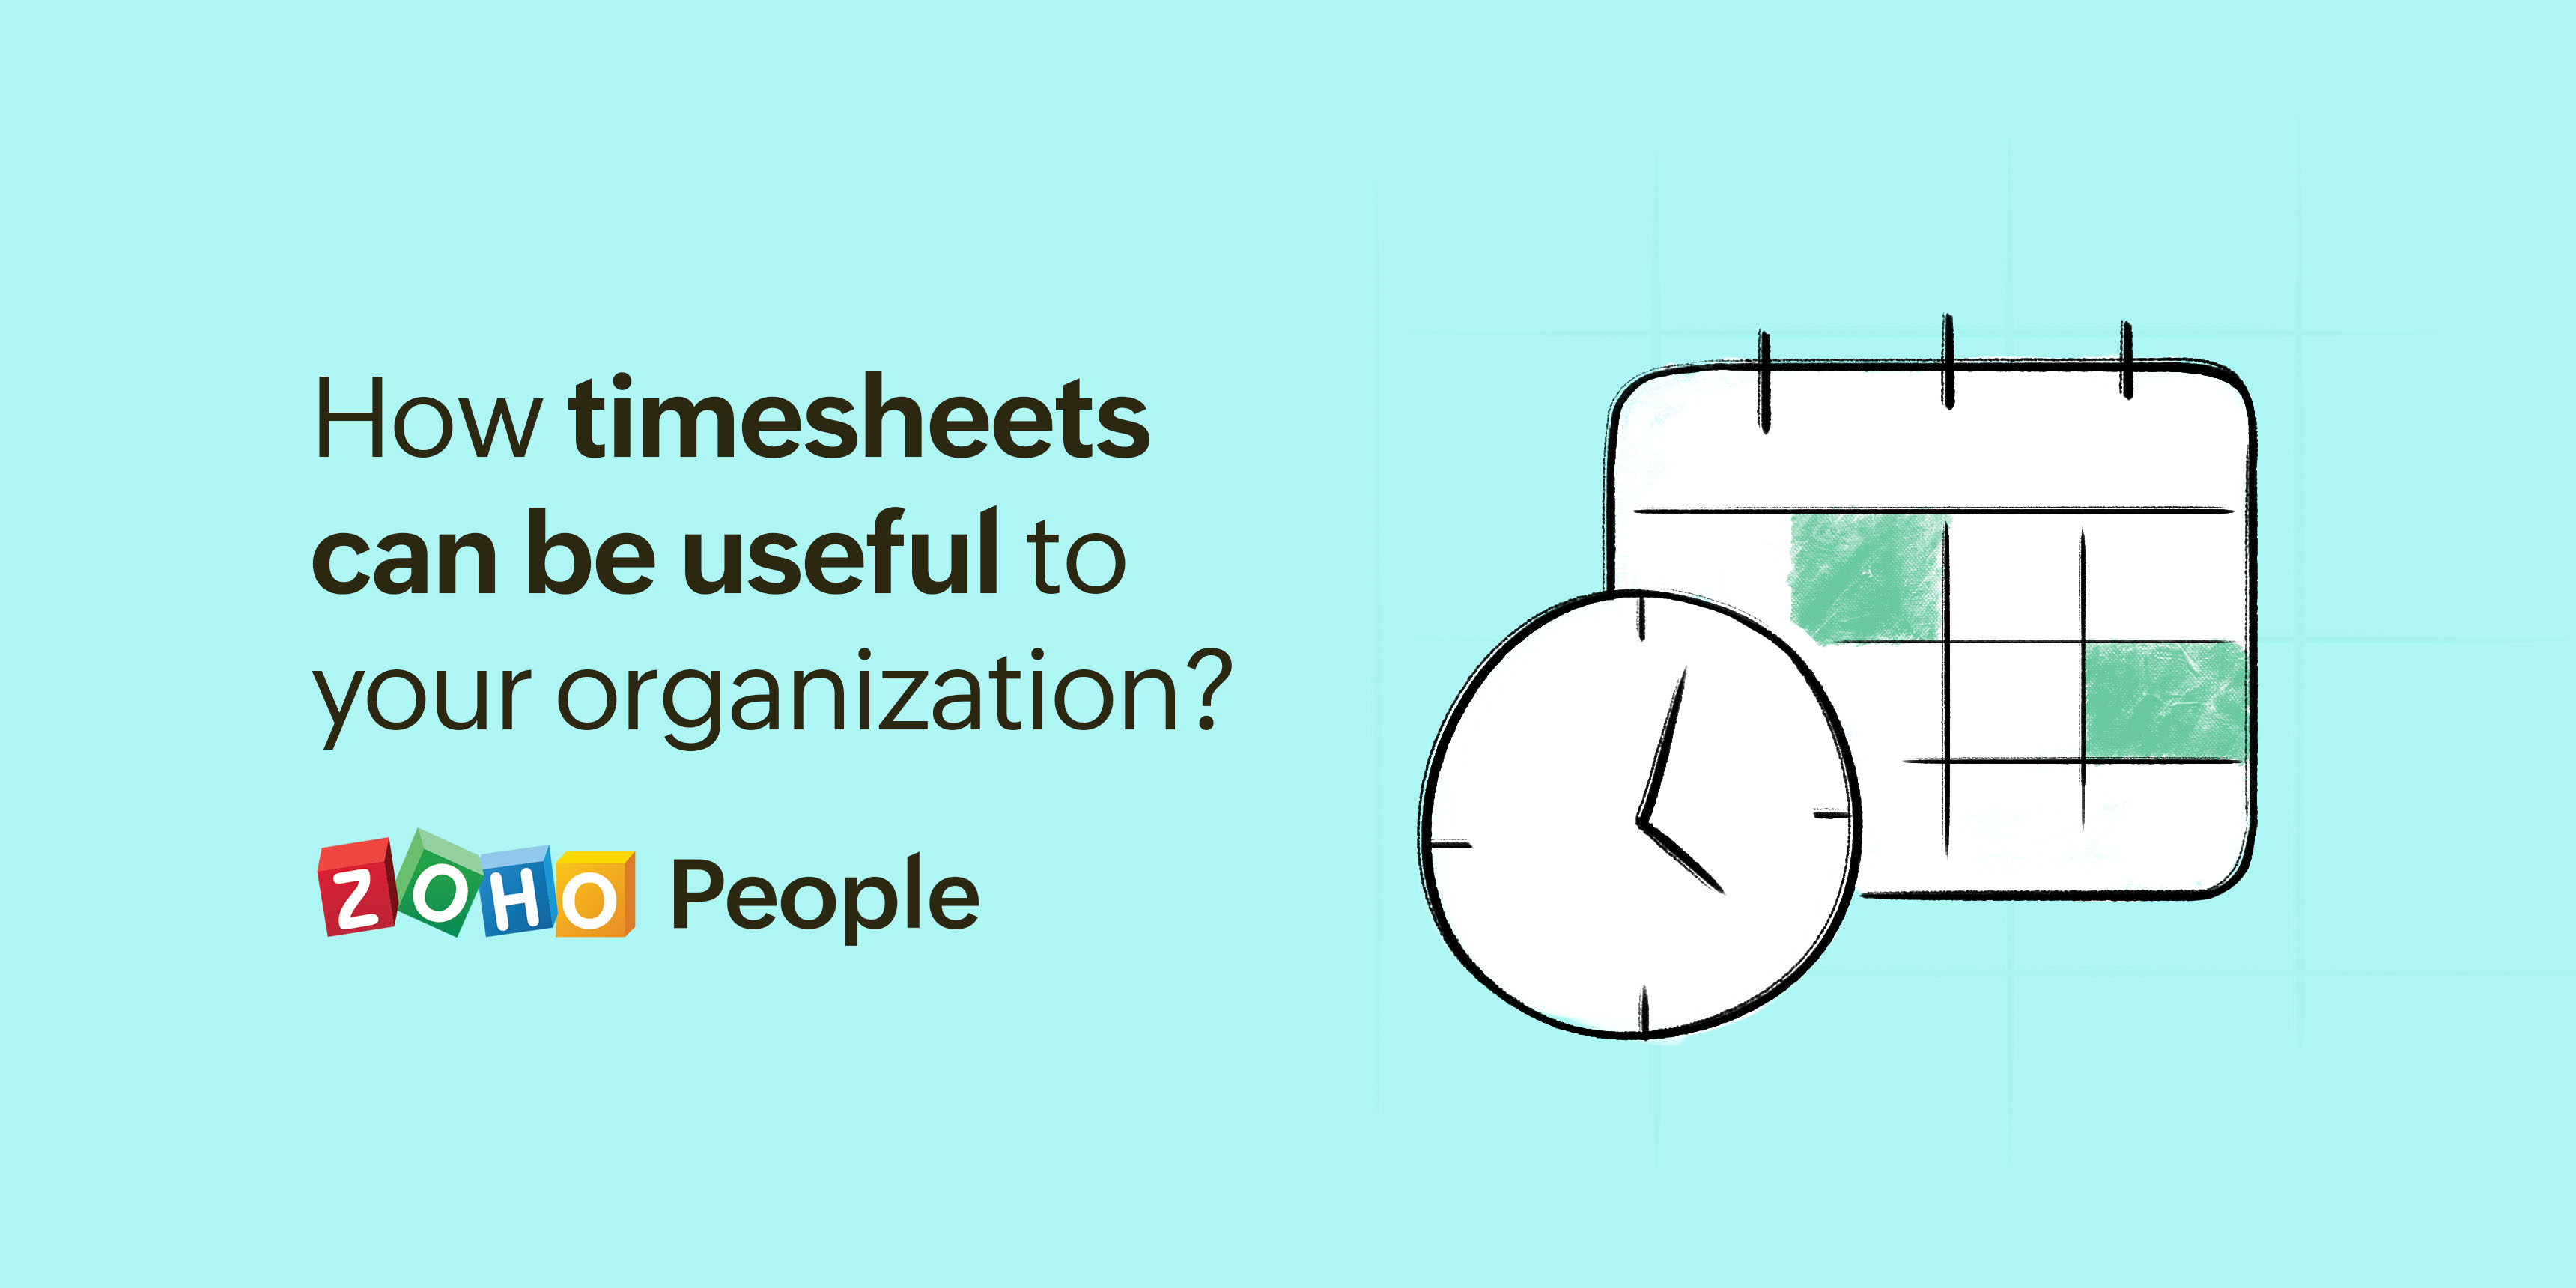 Benefits of using timesheets for your organization